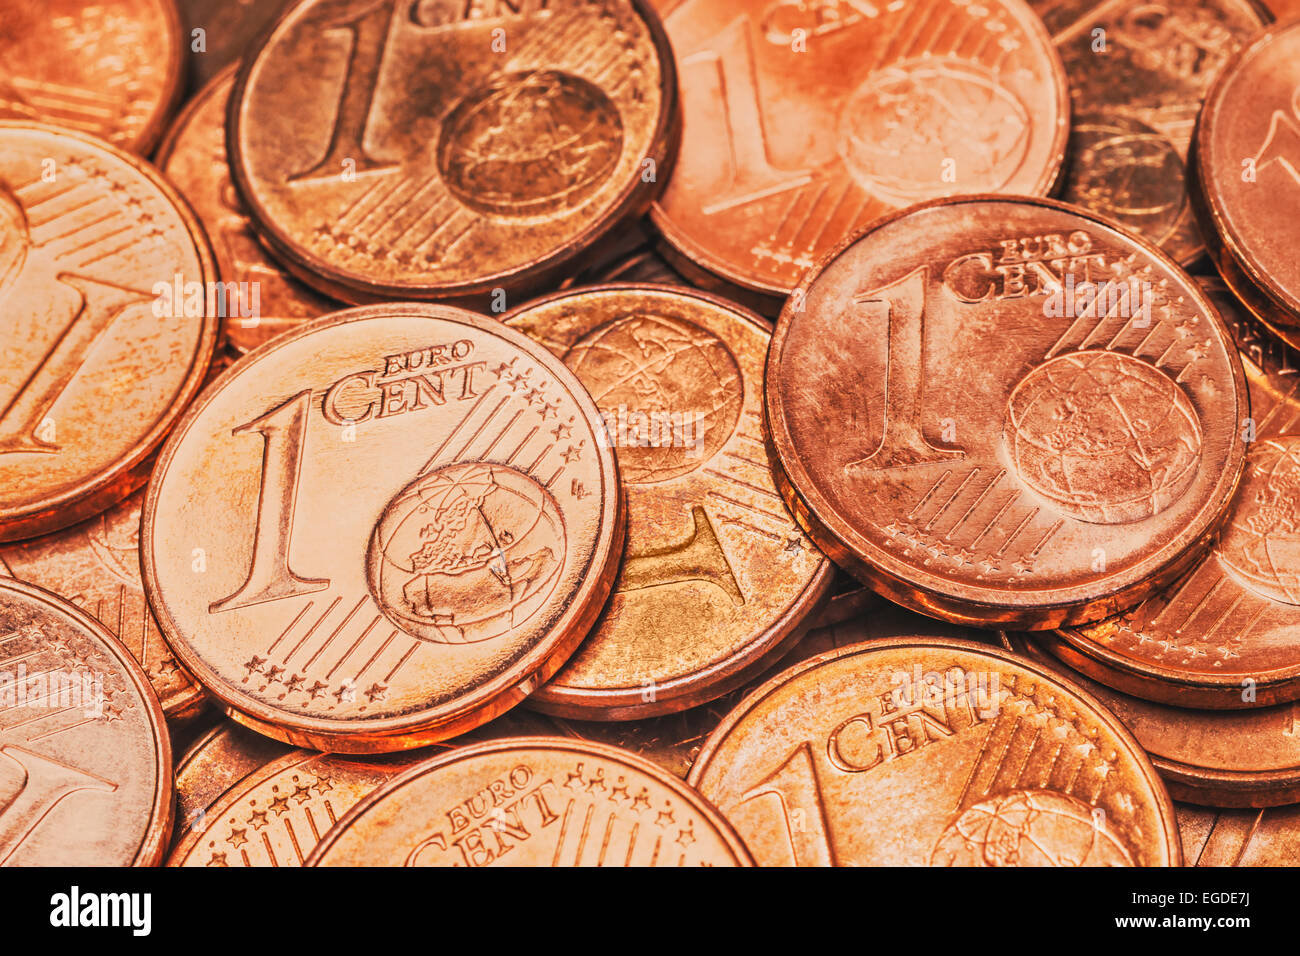 Many 1 Euro Cent coins, front side Stock Photo